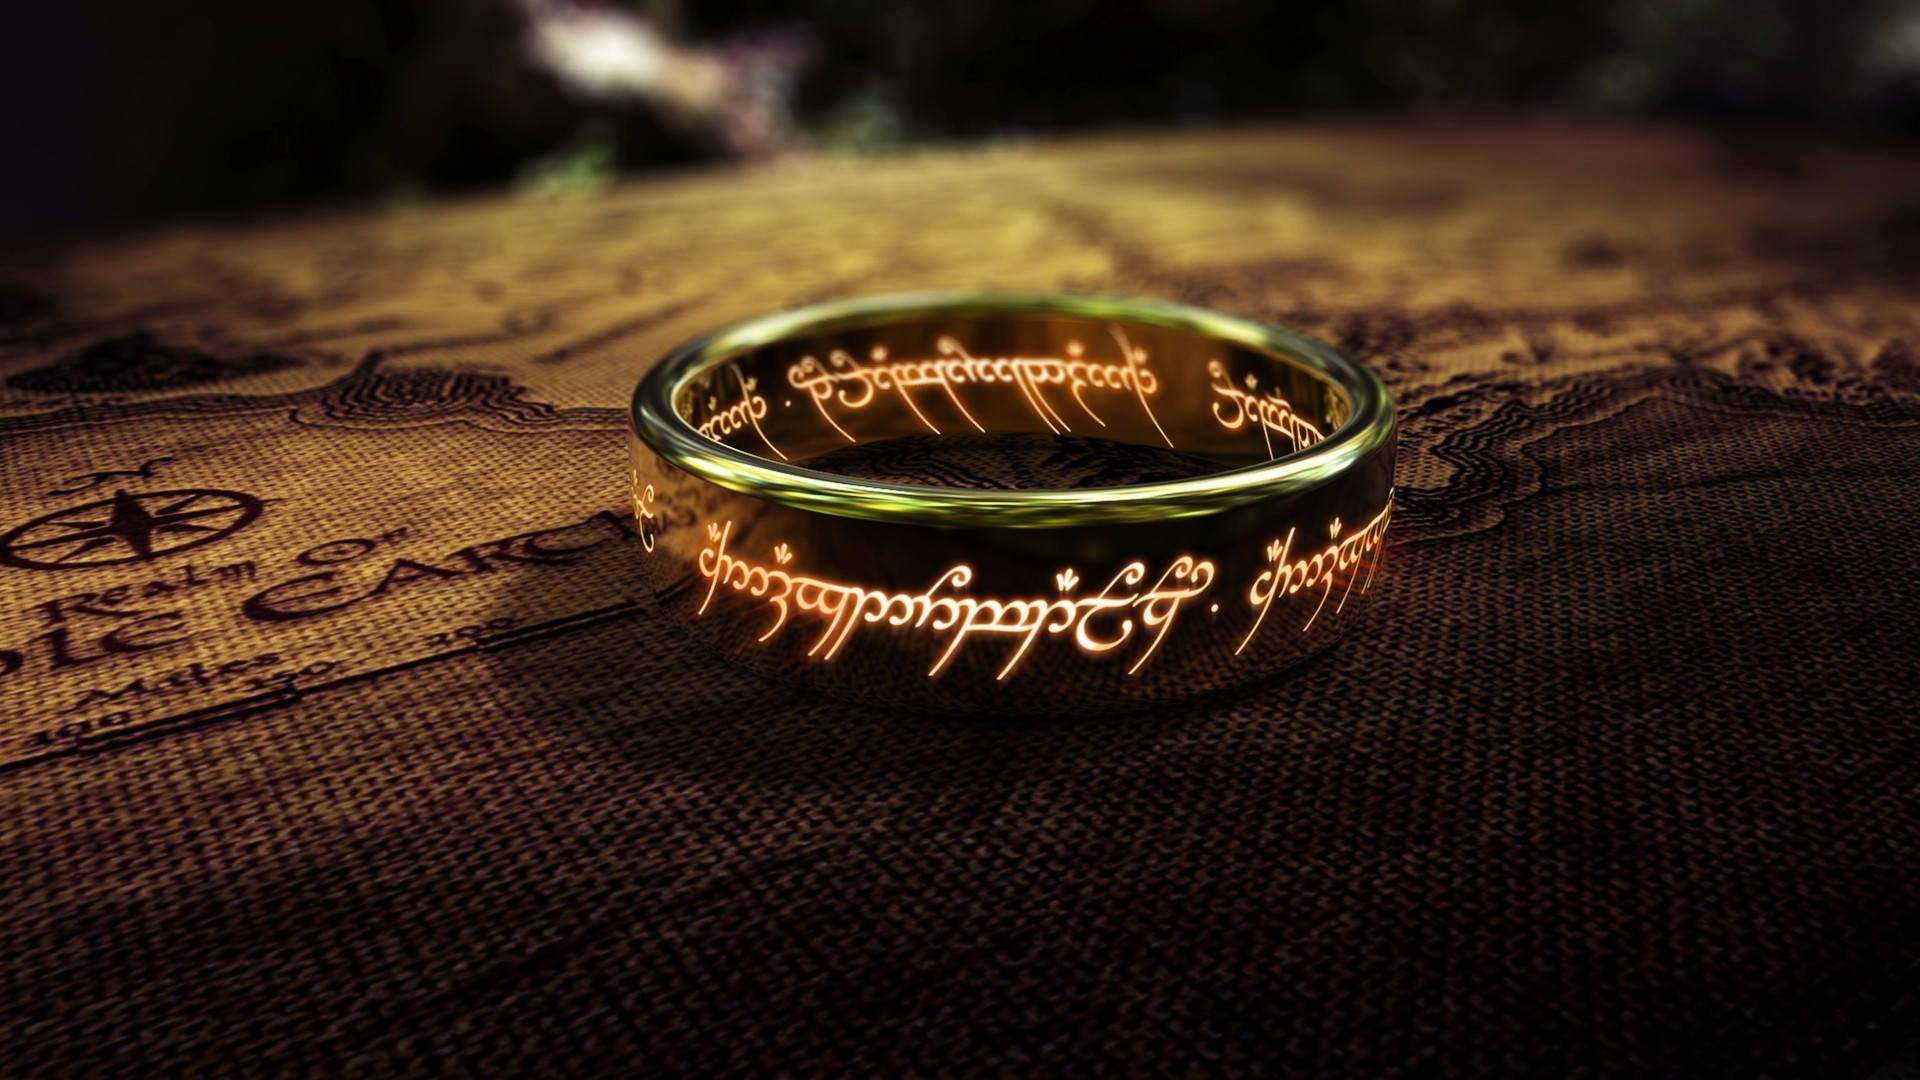 General 1920x1080 The One Ring The Lord of the Rings fantasy art movies rings